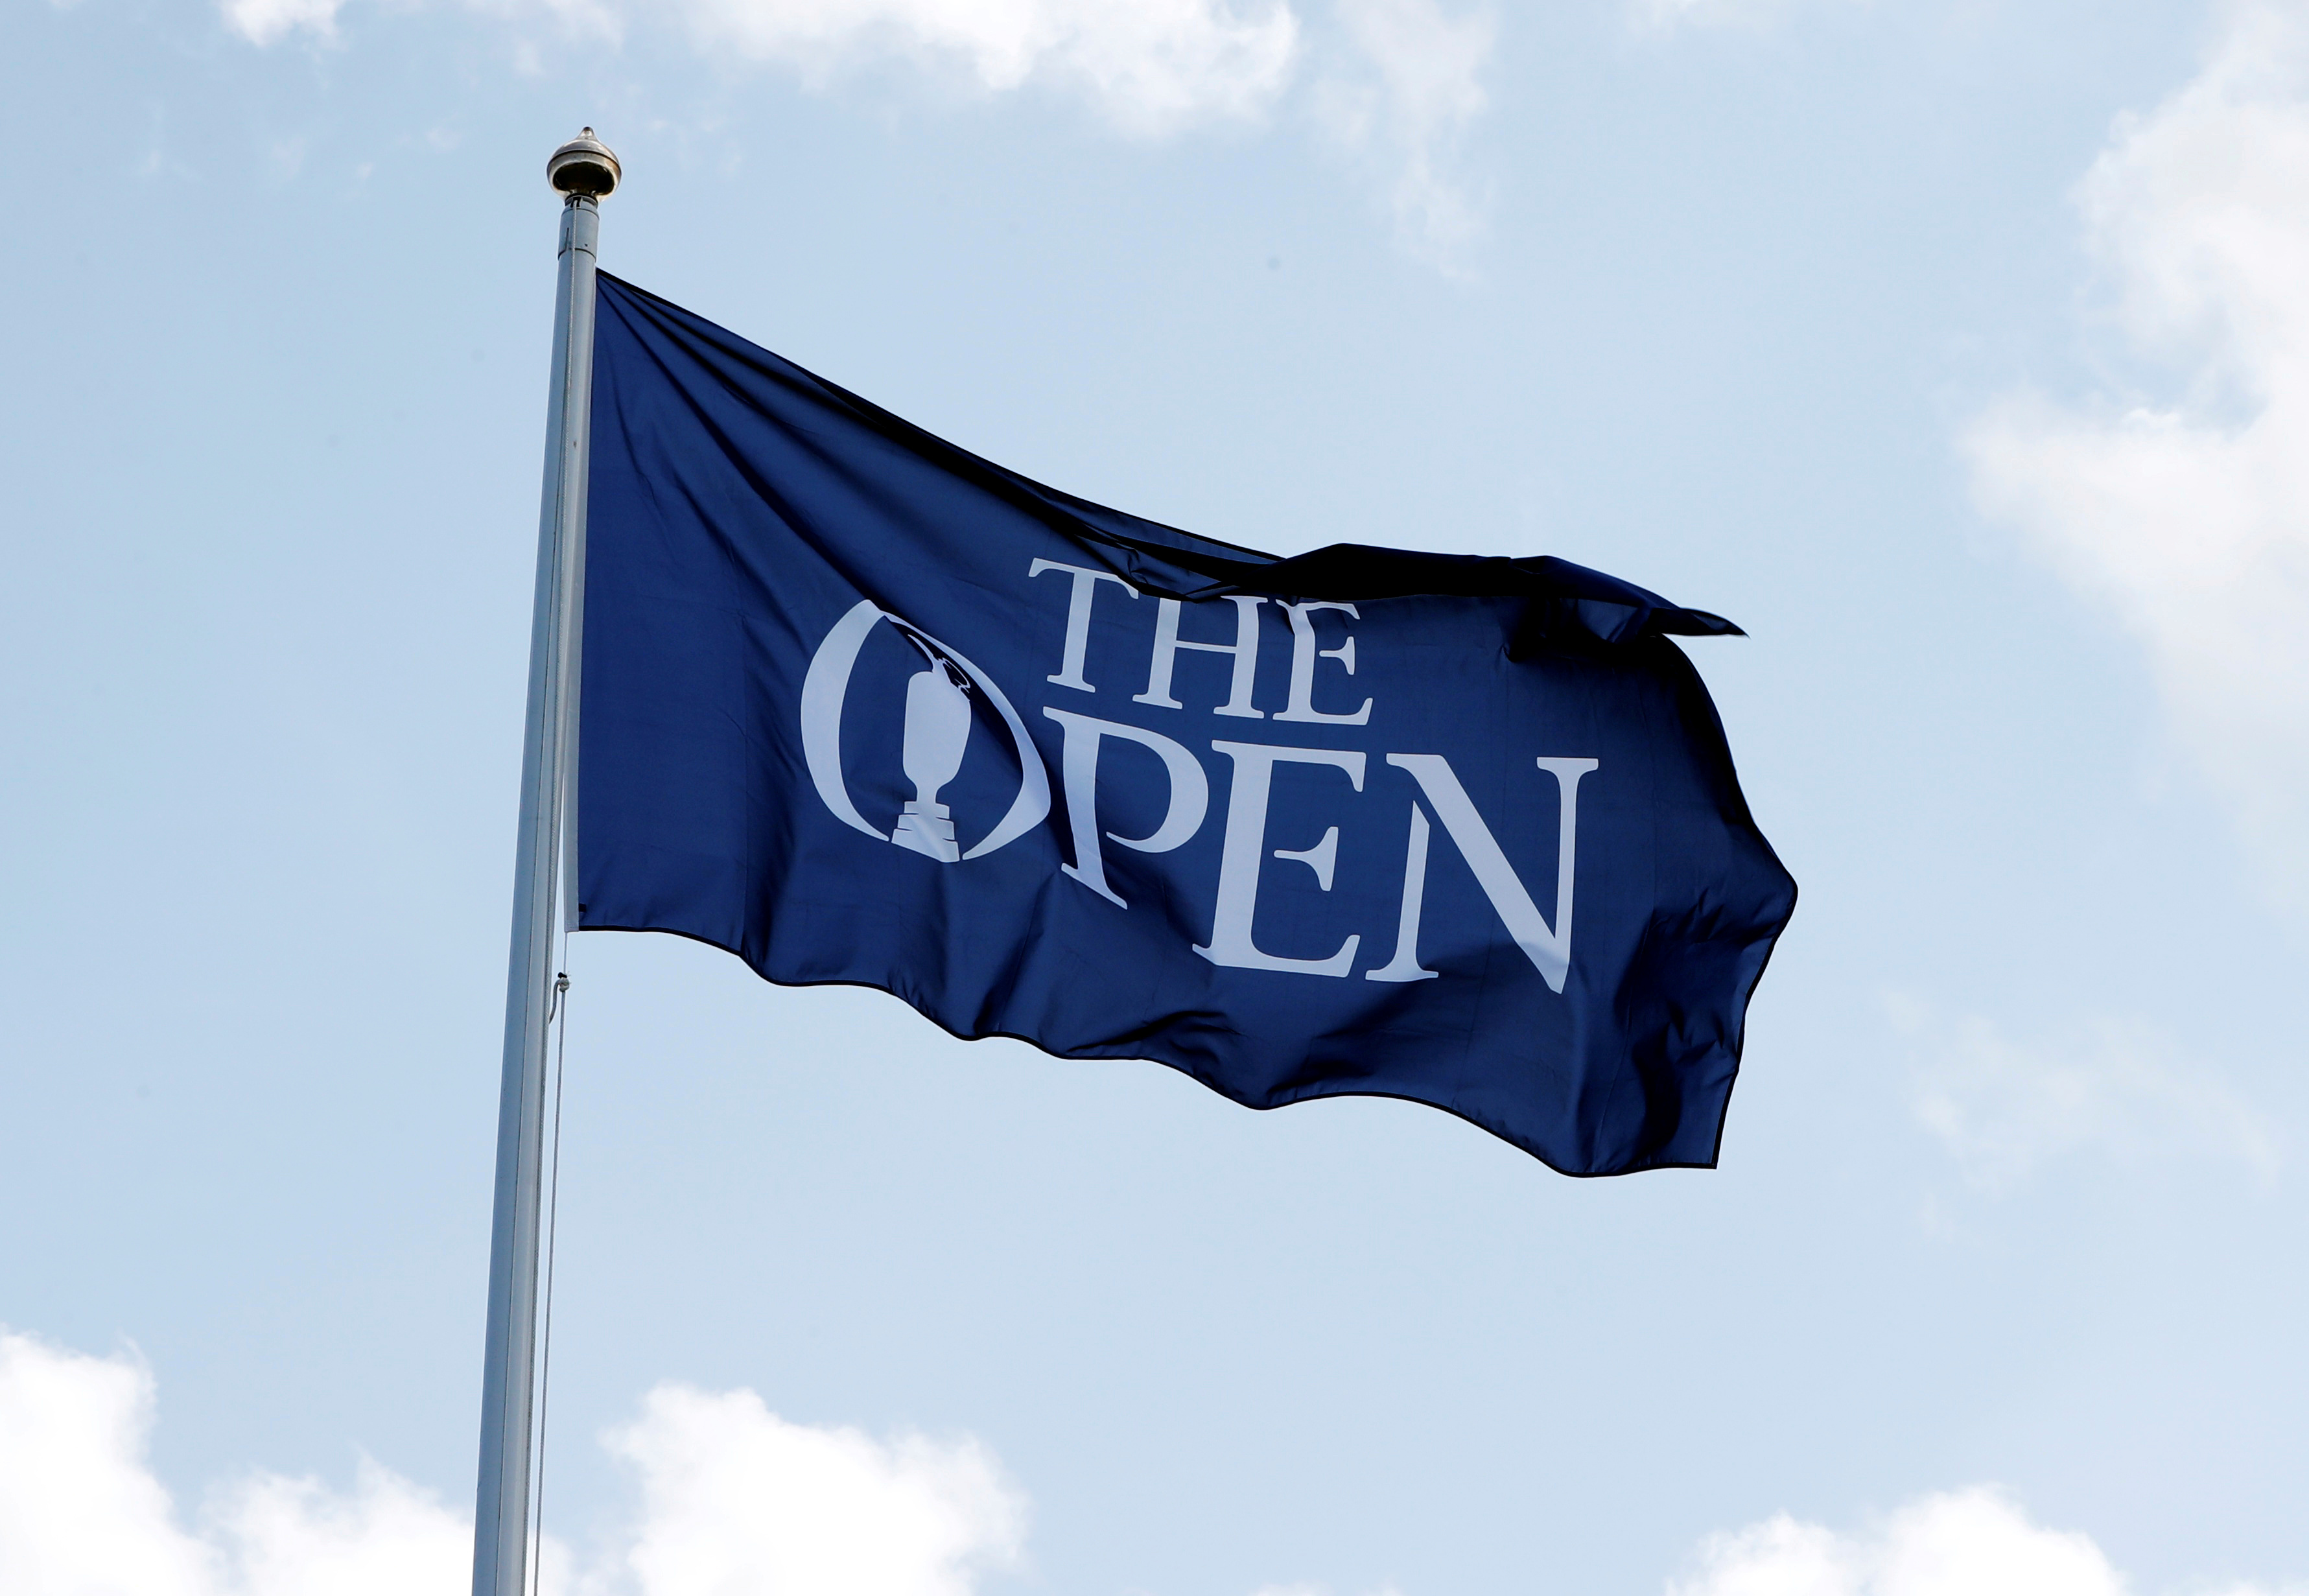 What's happening at Royal St George's now The Open is off until 2021?